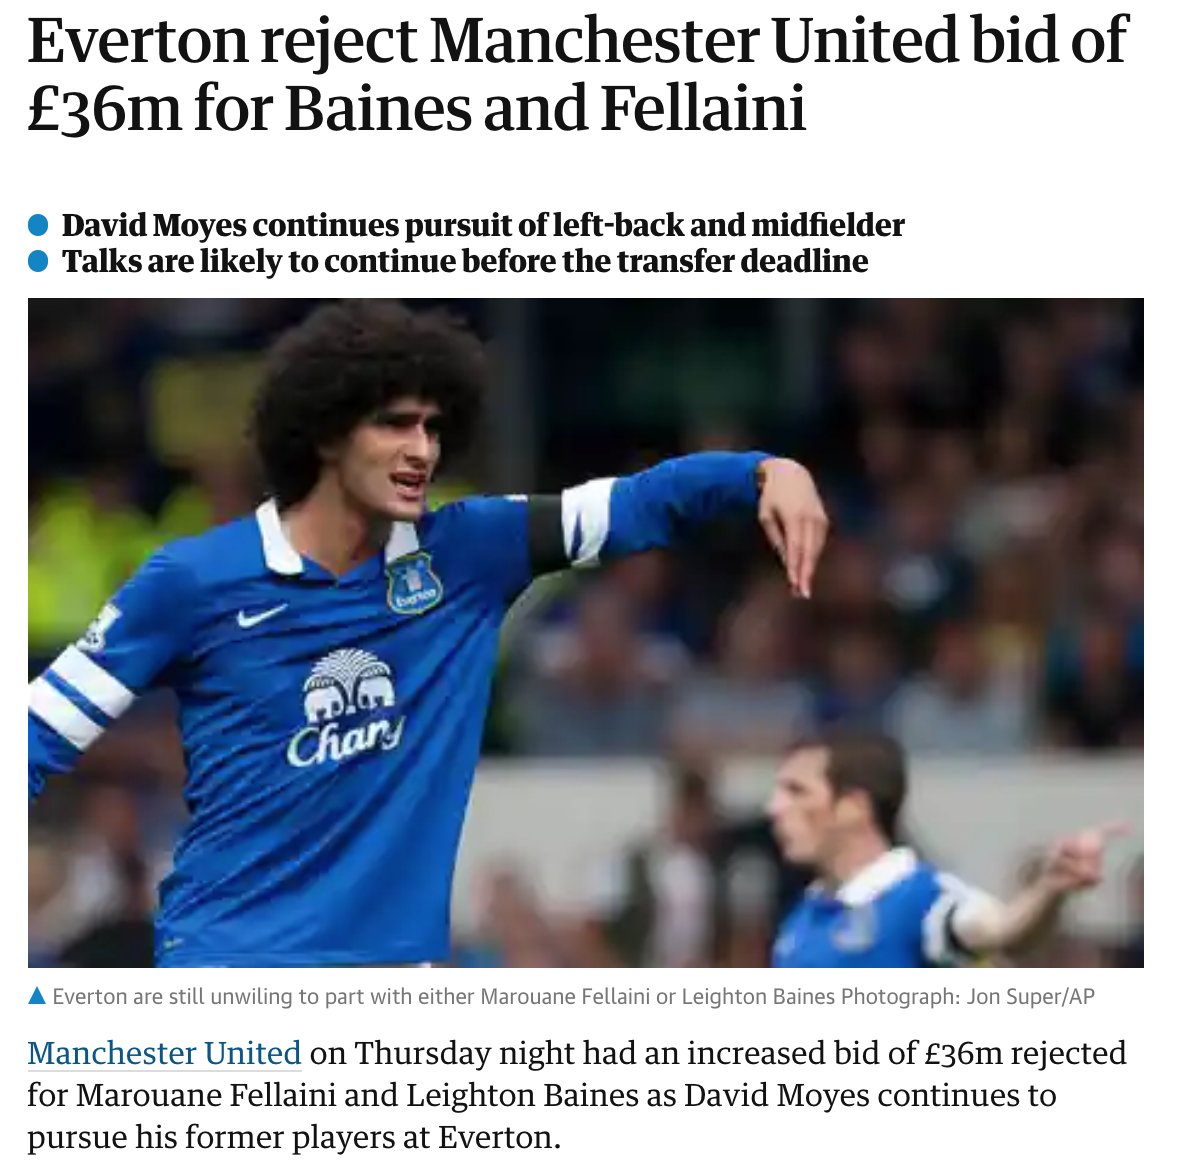 Three days later, United upped their bid for Fellaini and Baines to £36m, which was again rejected. Bale signed for Real Madrid. On deadline day we bid £40m for Sami Khedira and that was also rejected.